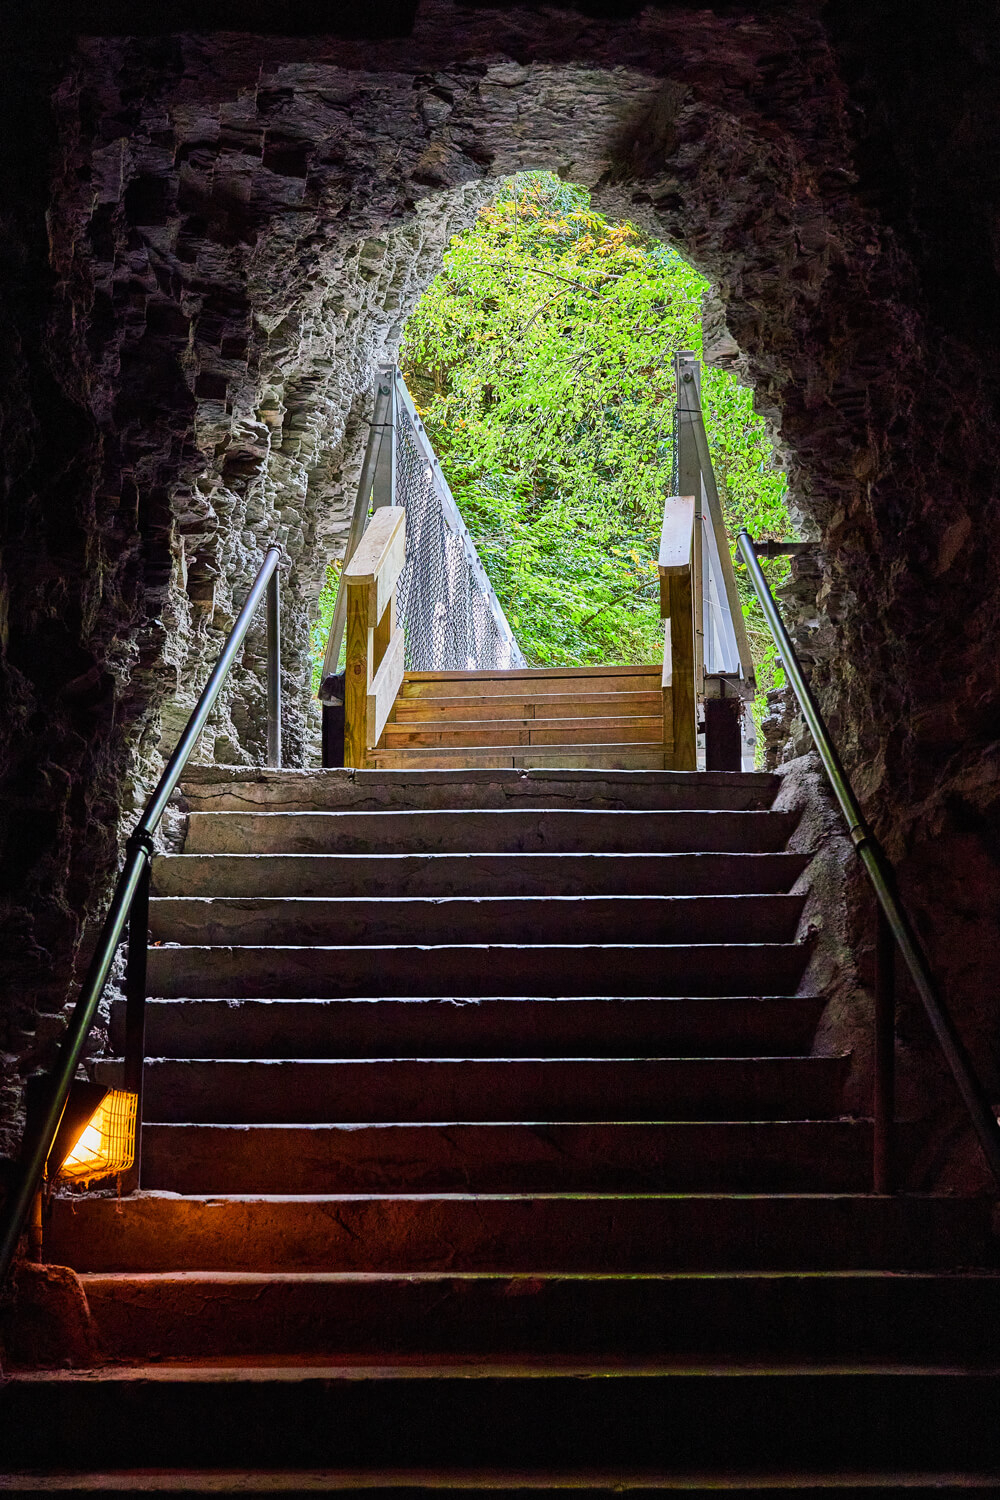 One of the paths that go through the caves